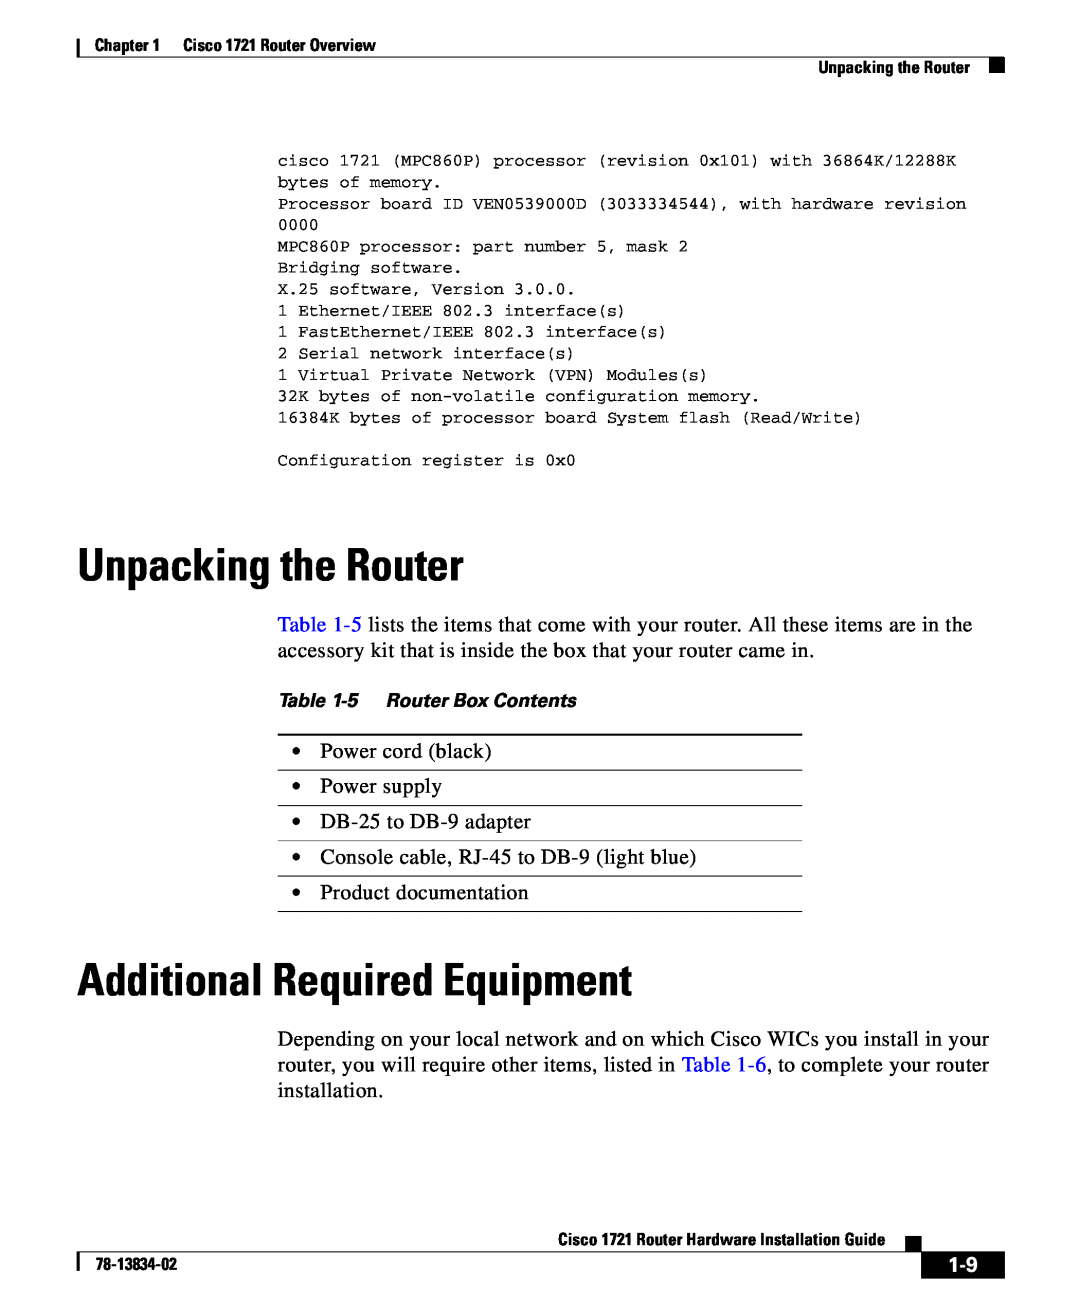 Cisco Systems 1721 manual Unpacking the Router, Additional Required Equipment 